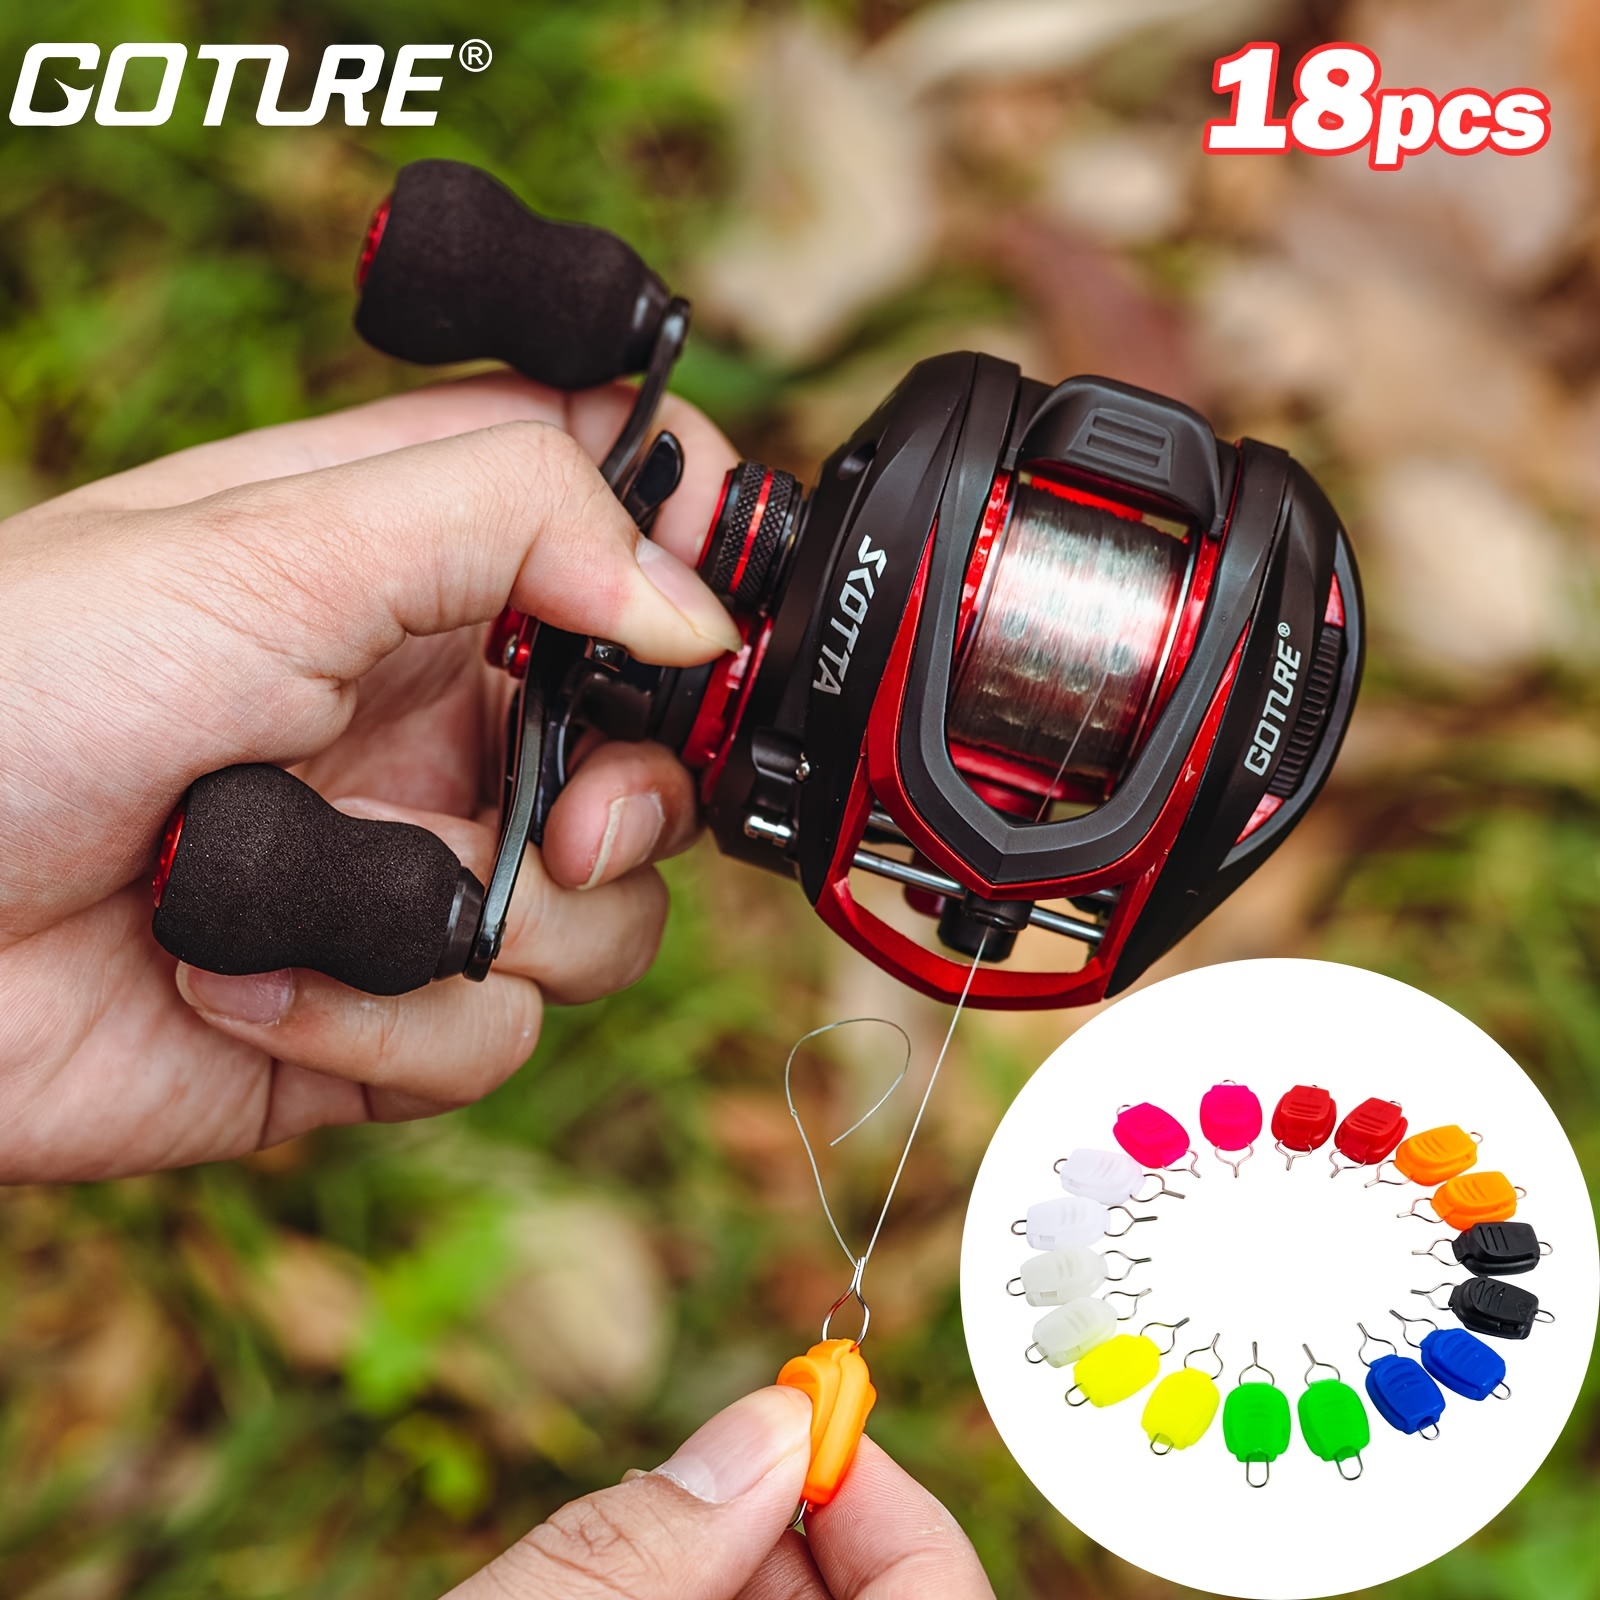 * 18pcs Fishing Reel Line Stopper Tackle Baitcasting Spinning Reel Line  Clip Buckle, 2 Each Of 9 Colors, Fishing Reel Not Included